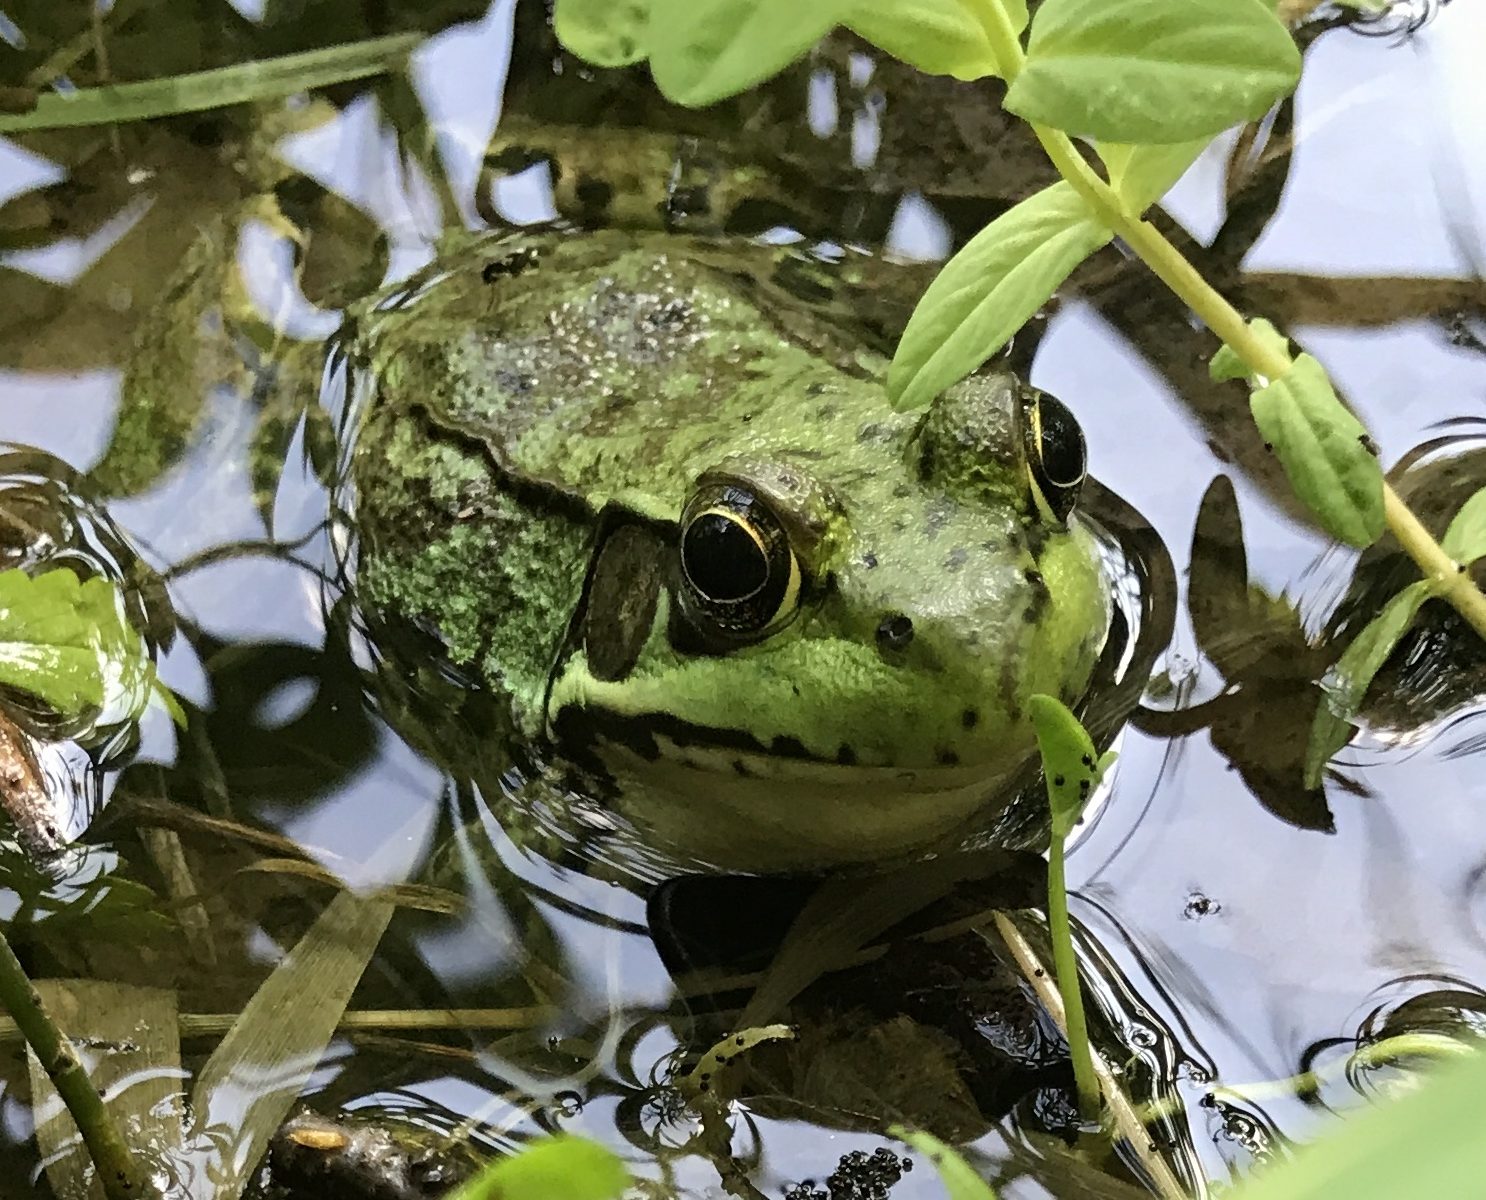 Green Frog half submerged in pond water